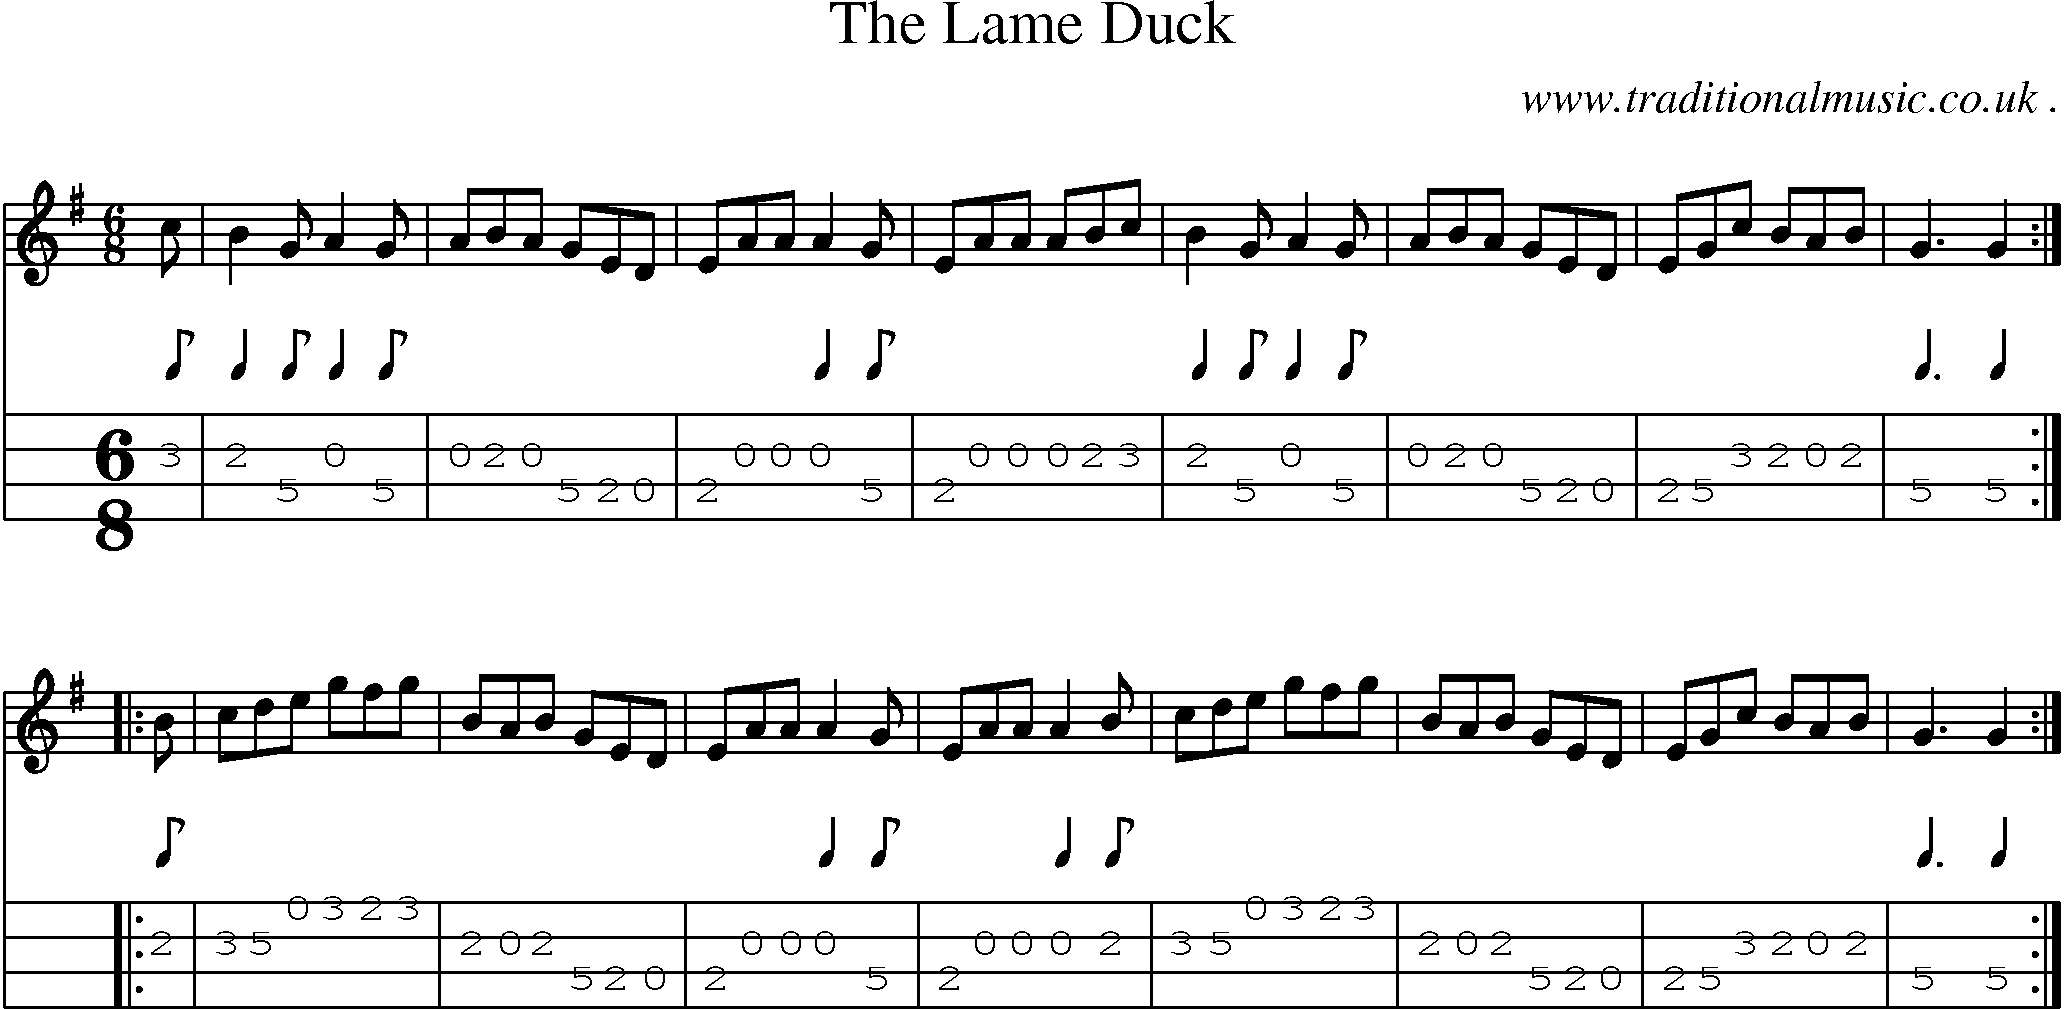 Sheet-music  score, Chords and Mandolin Tabs for The Lame Duck